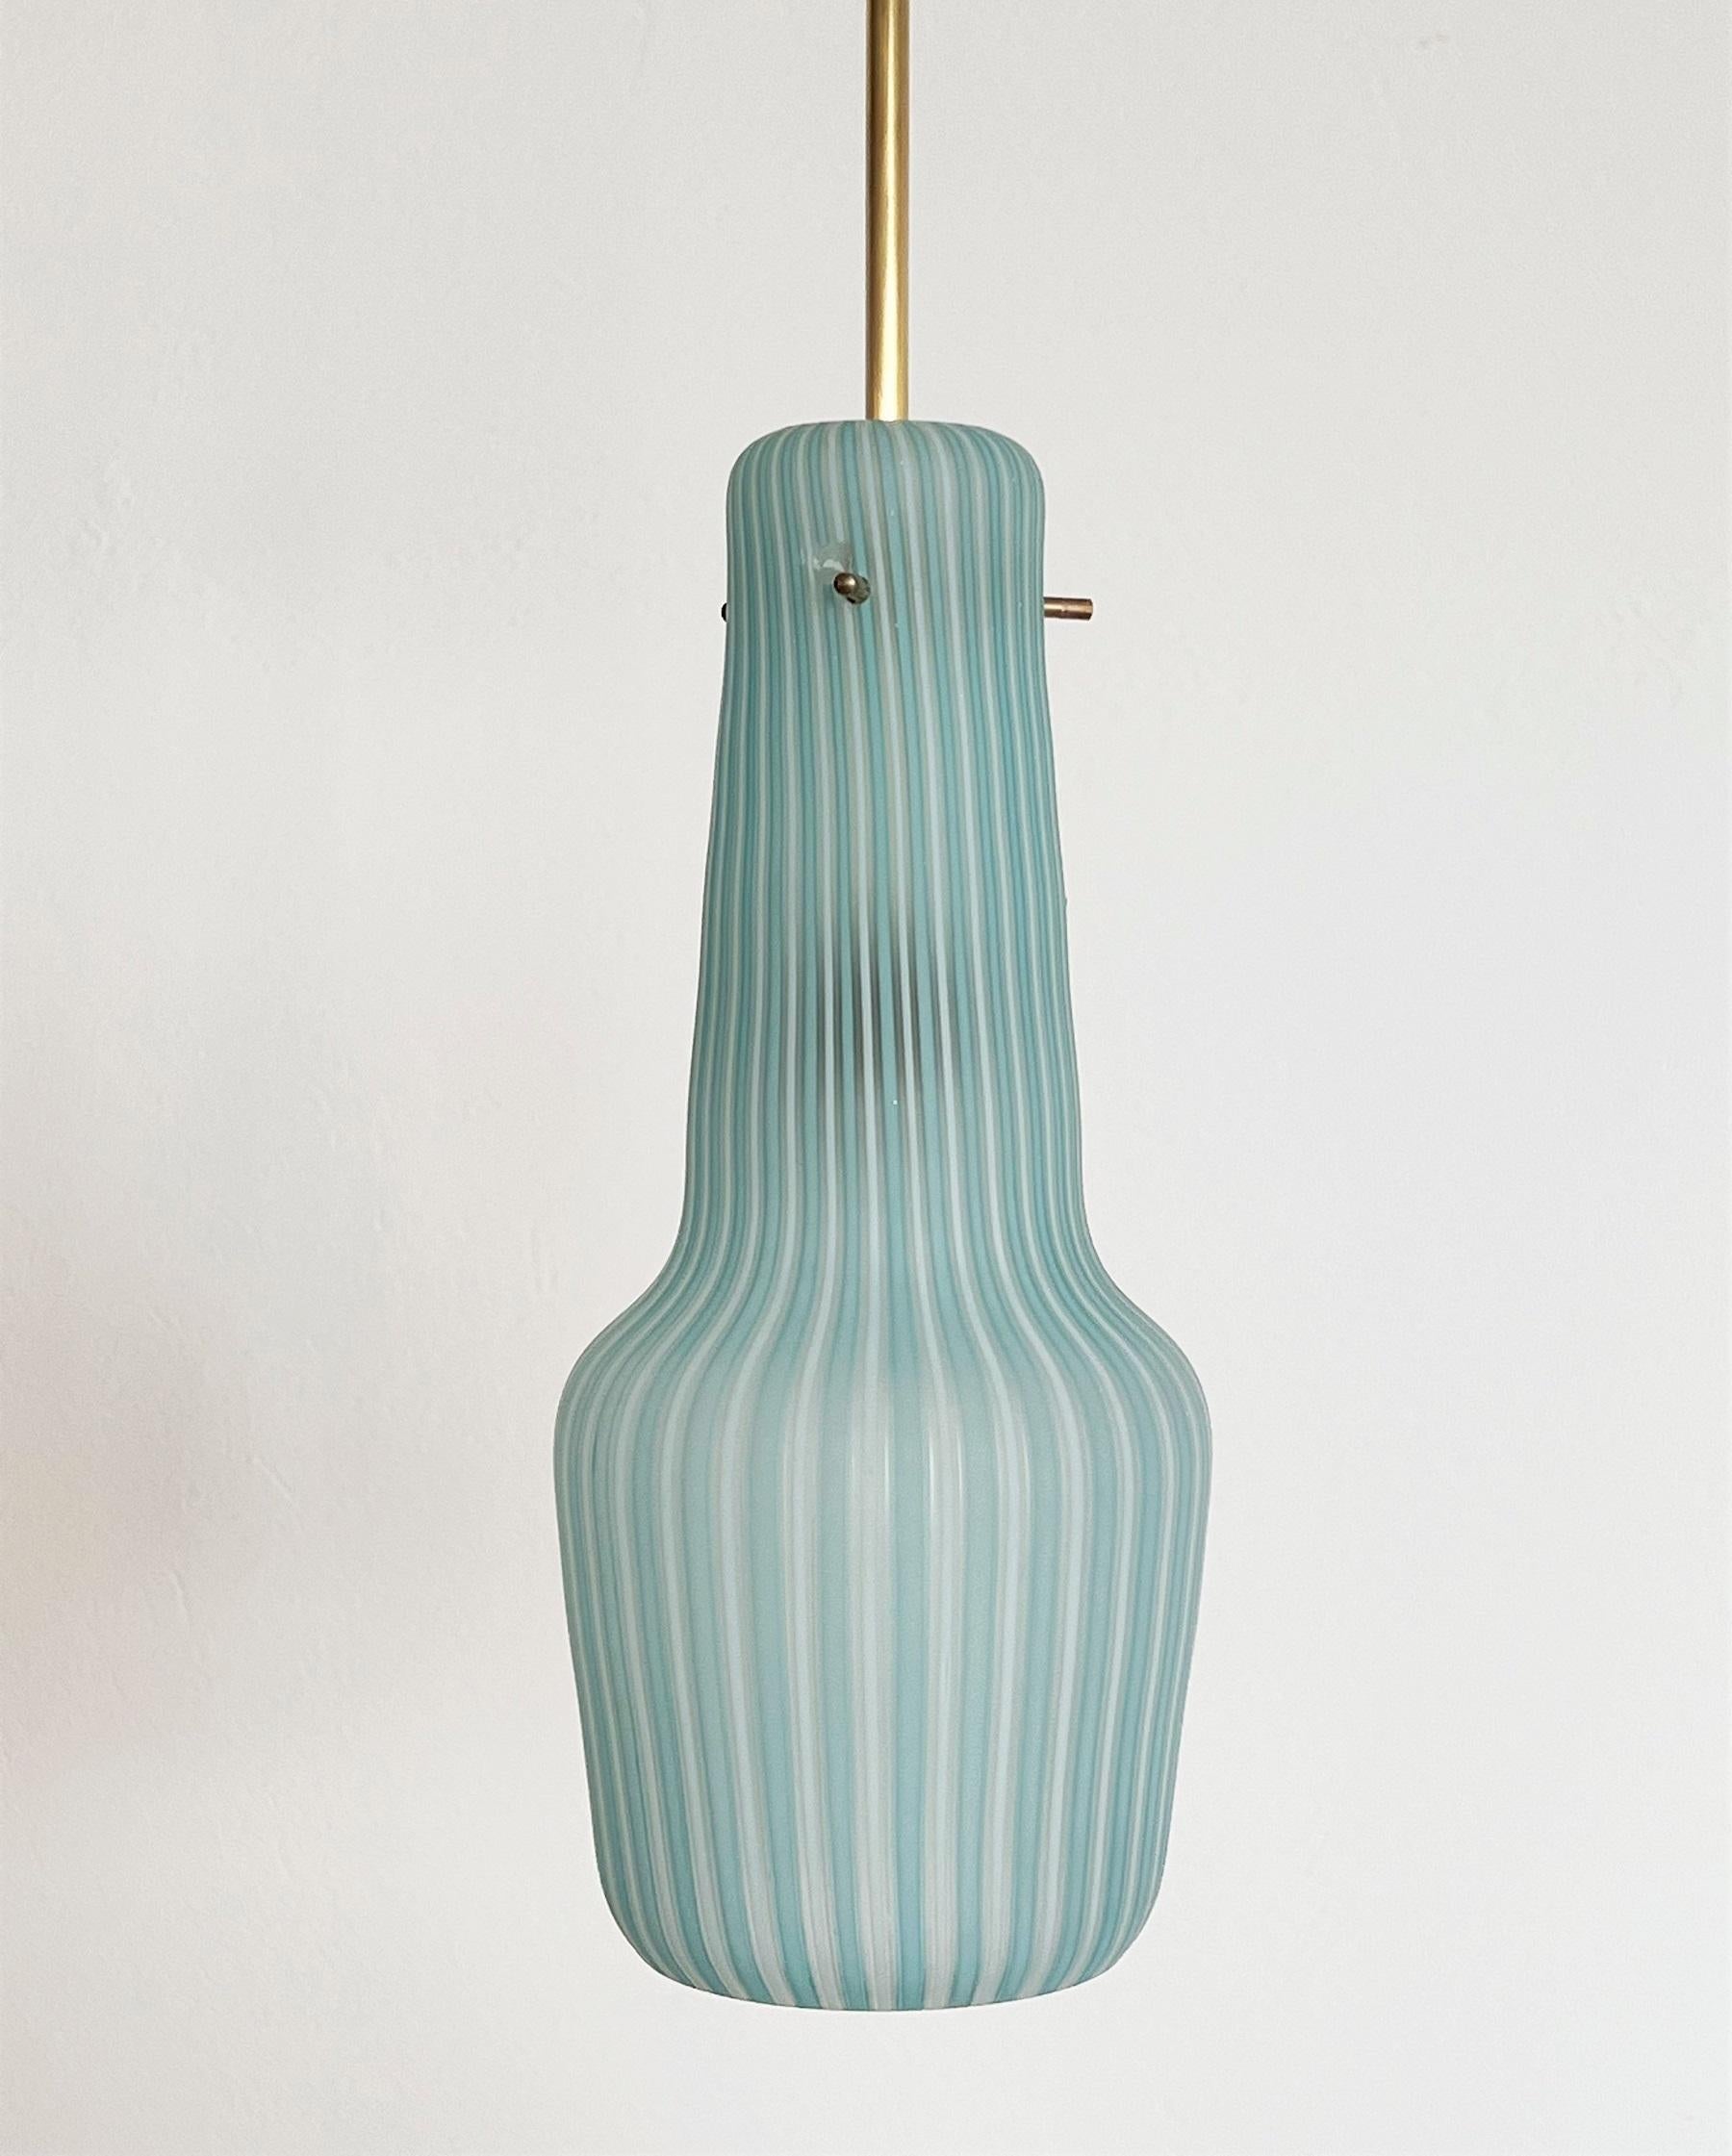 Beautiful small hanging lamp or lantern from Venini glass production in Italy in the 1950s.
The glass is handmade and has regular white-blue stripes and a very nice shape. 
The color is just wonderful, much better in person than in the photos.
The